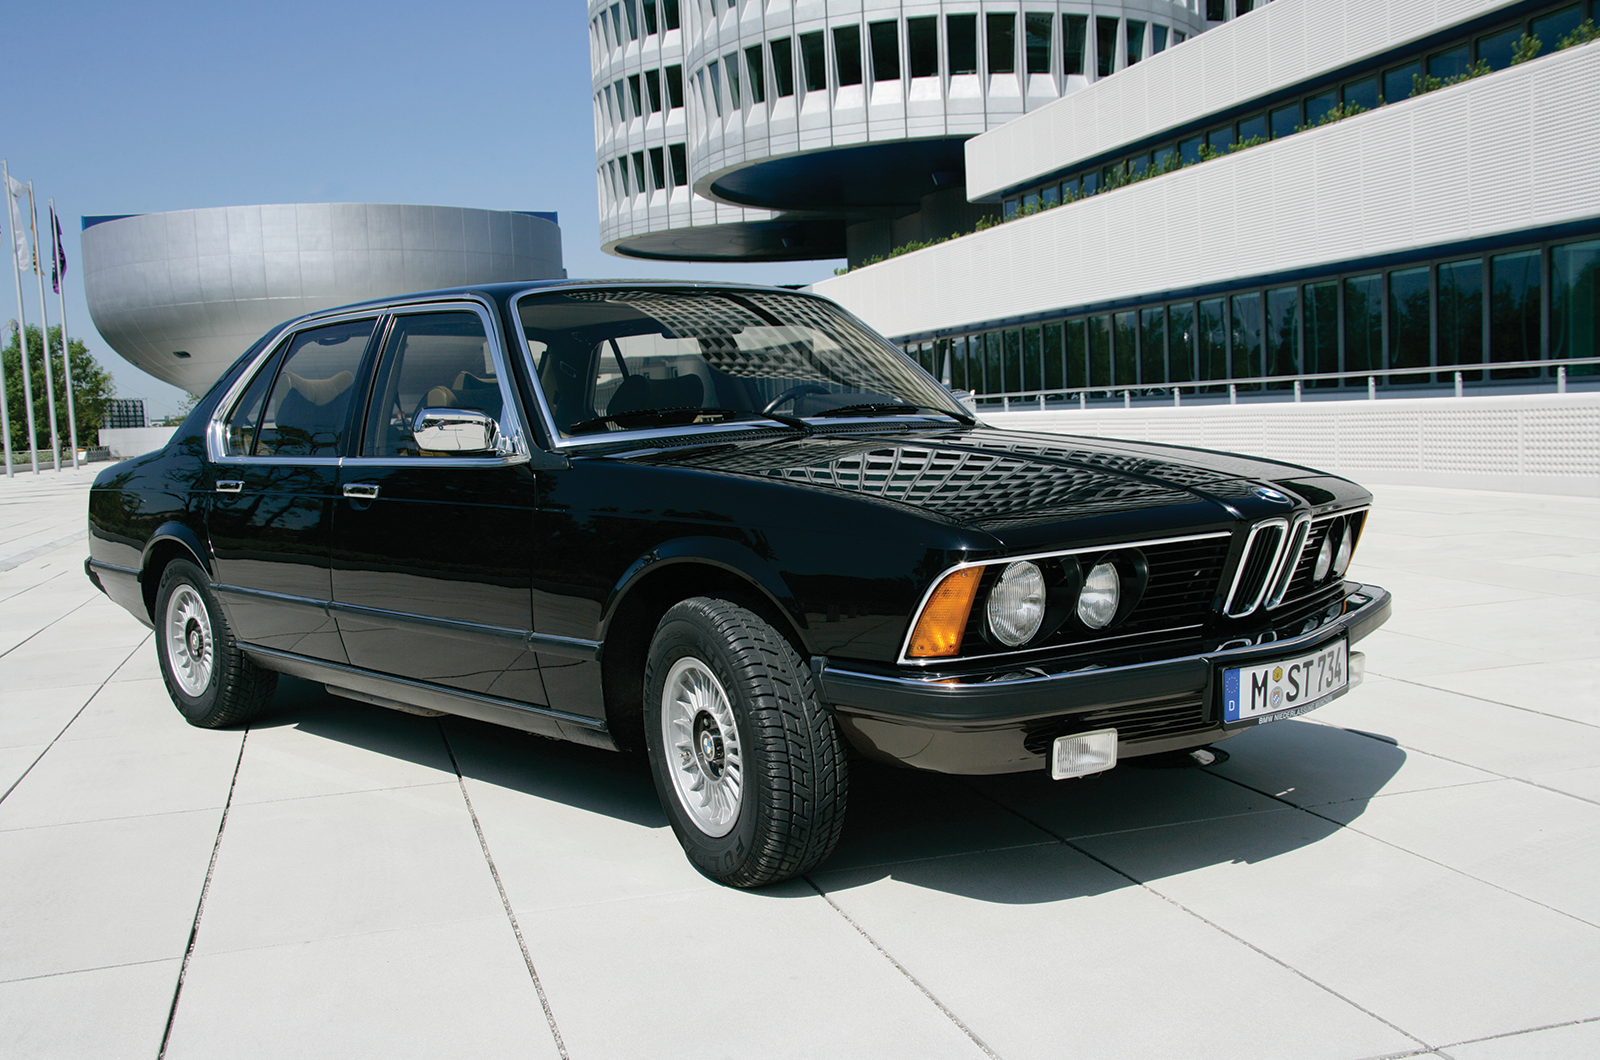 Classic & Sports Car – Pride of Bavaria: driving the BMW 7 Series